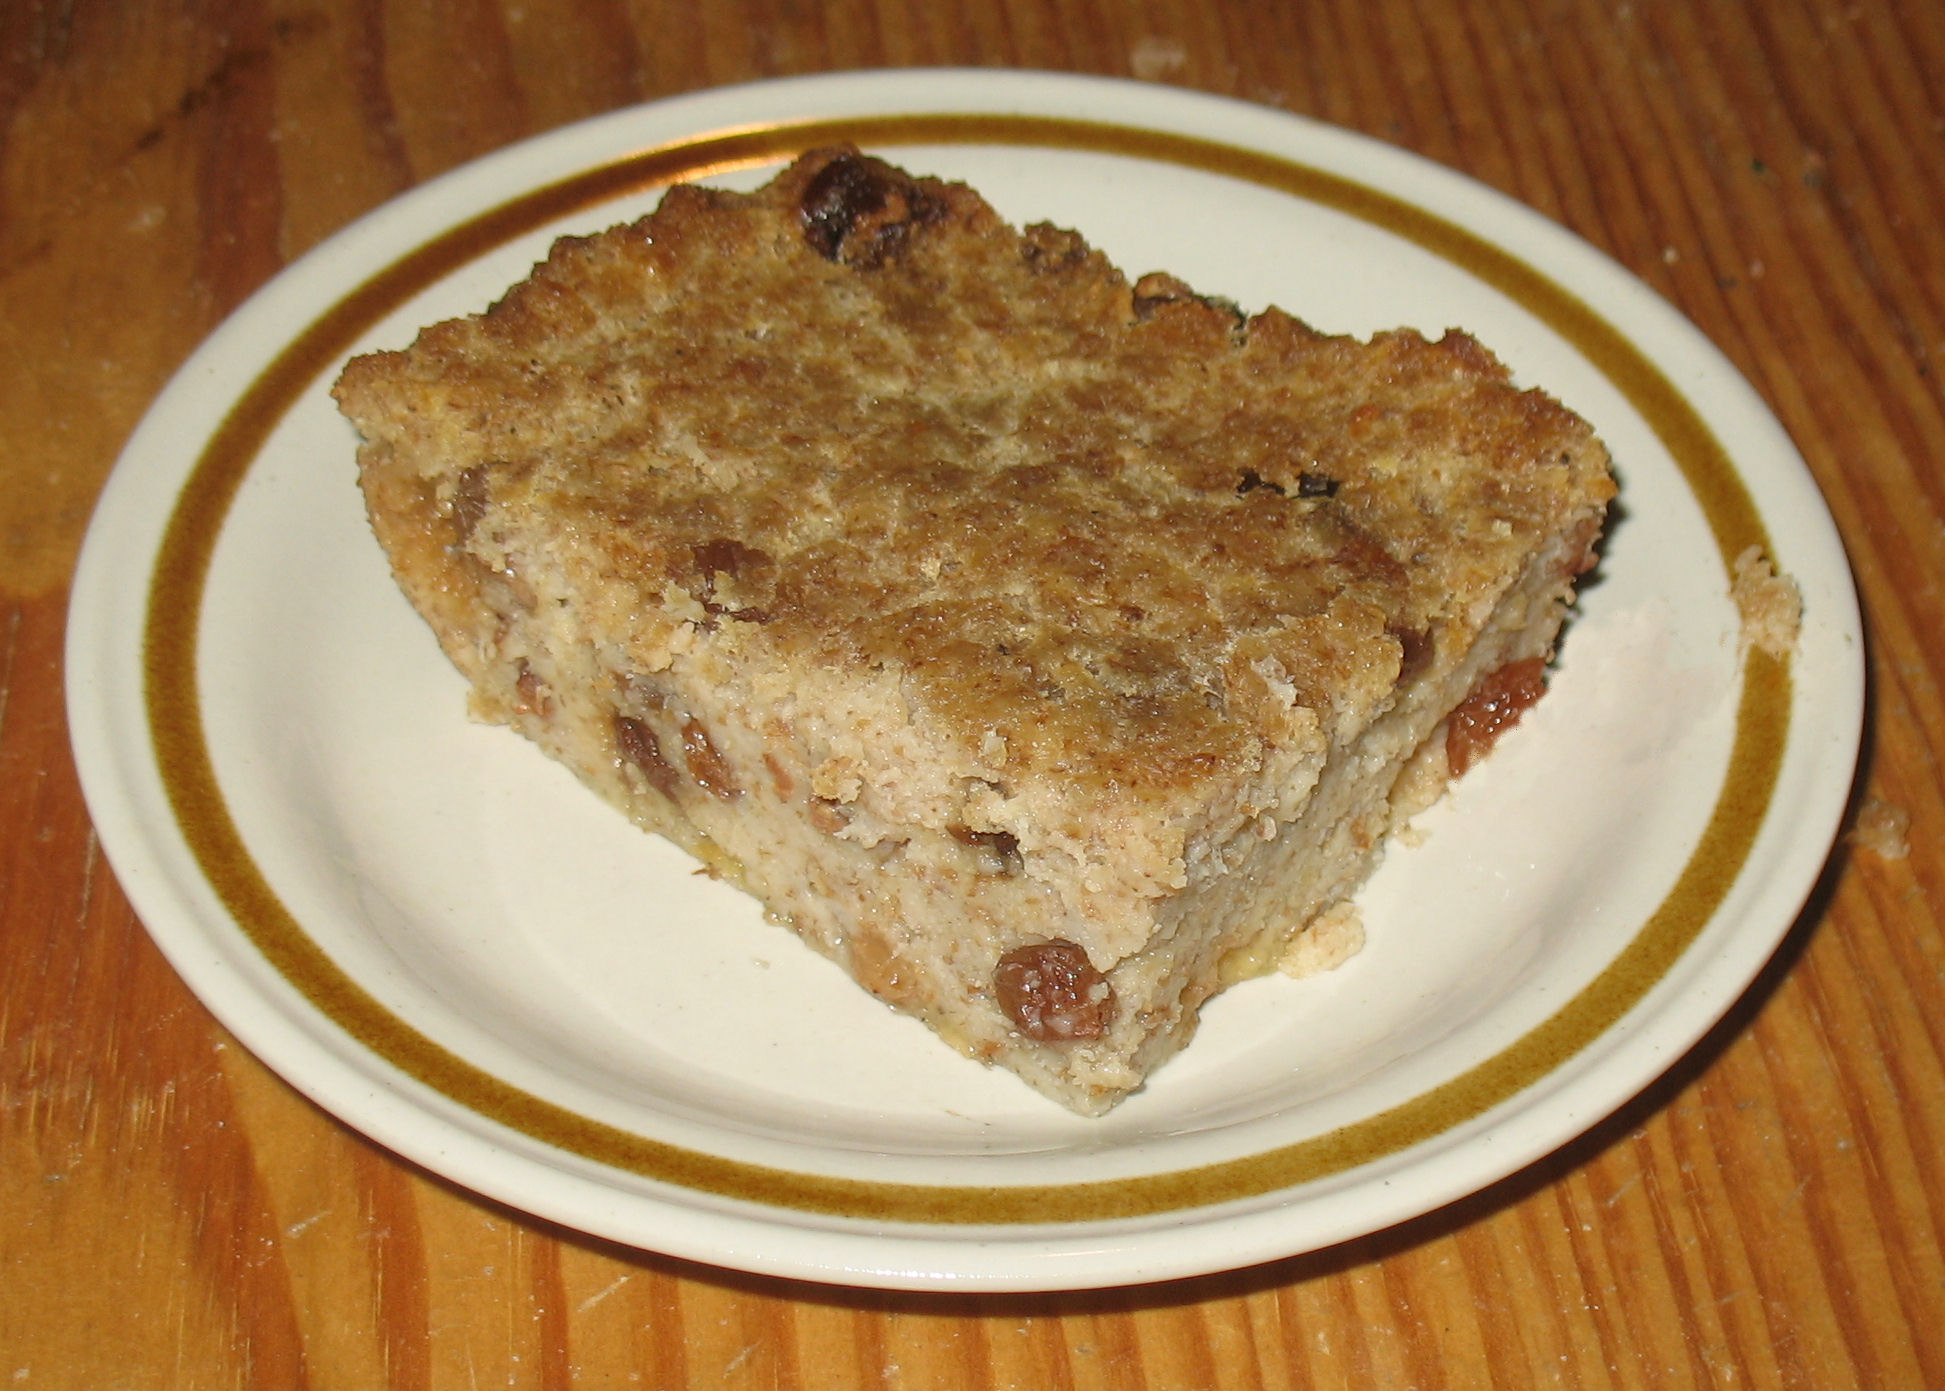 https://commons.wikimedia.org/wiki/File:Rew13c05-745a_Bread_Pudding.JPG